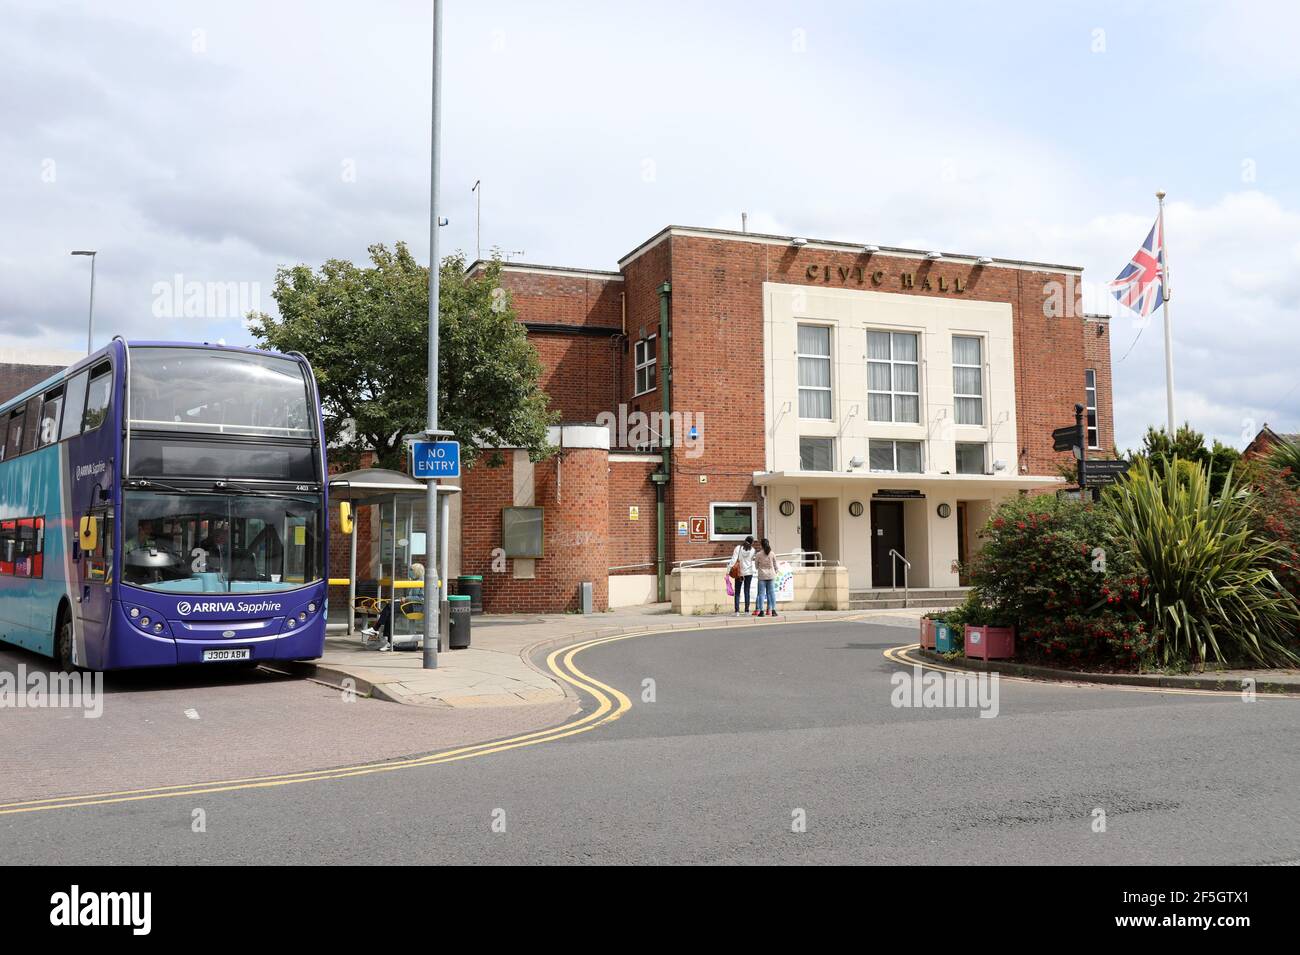 Nantwich Bus Station and Civic Hall Stock Photo